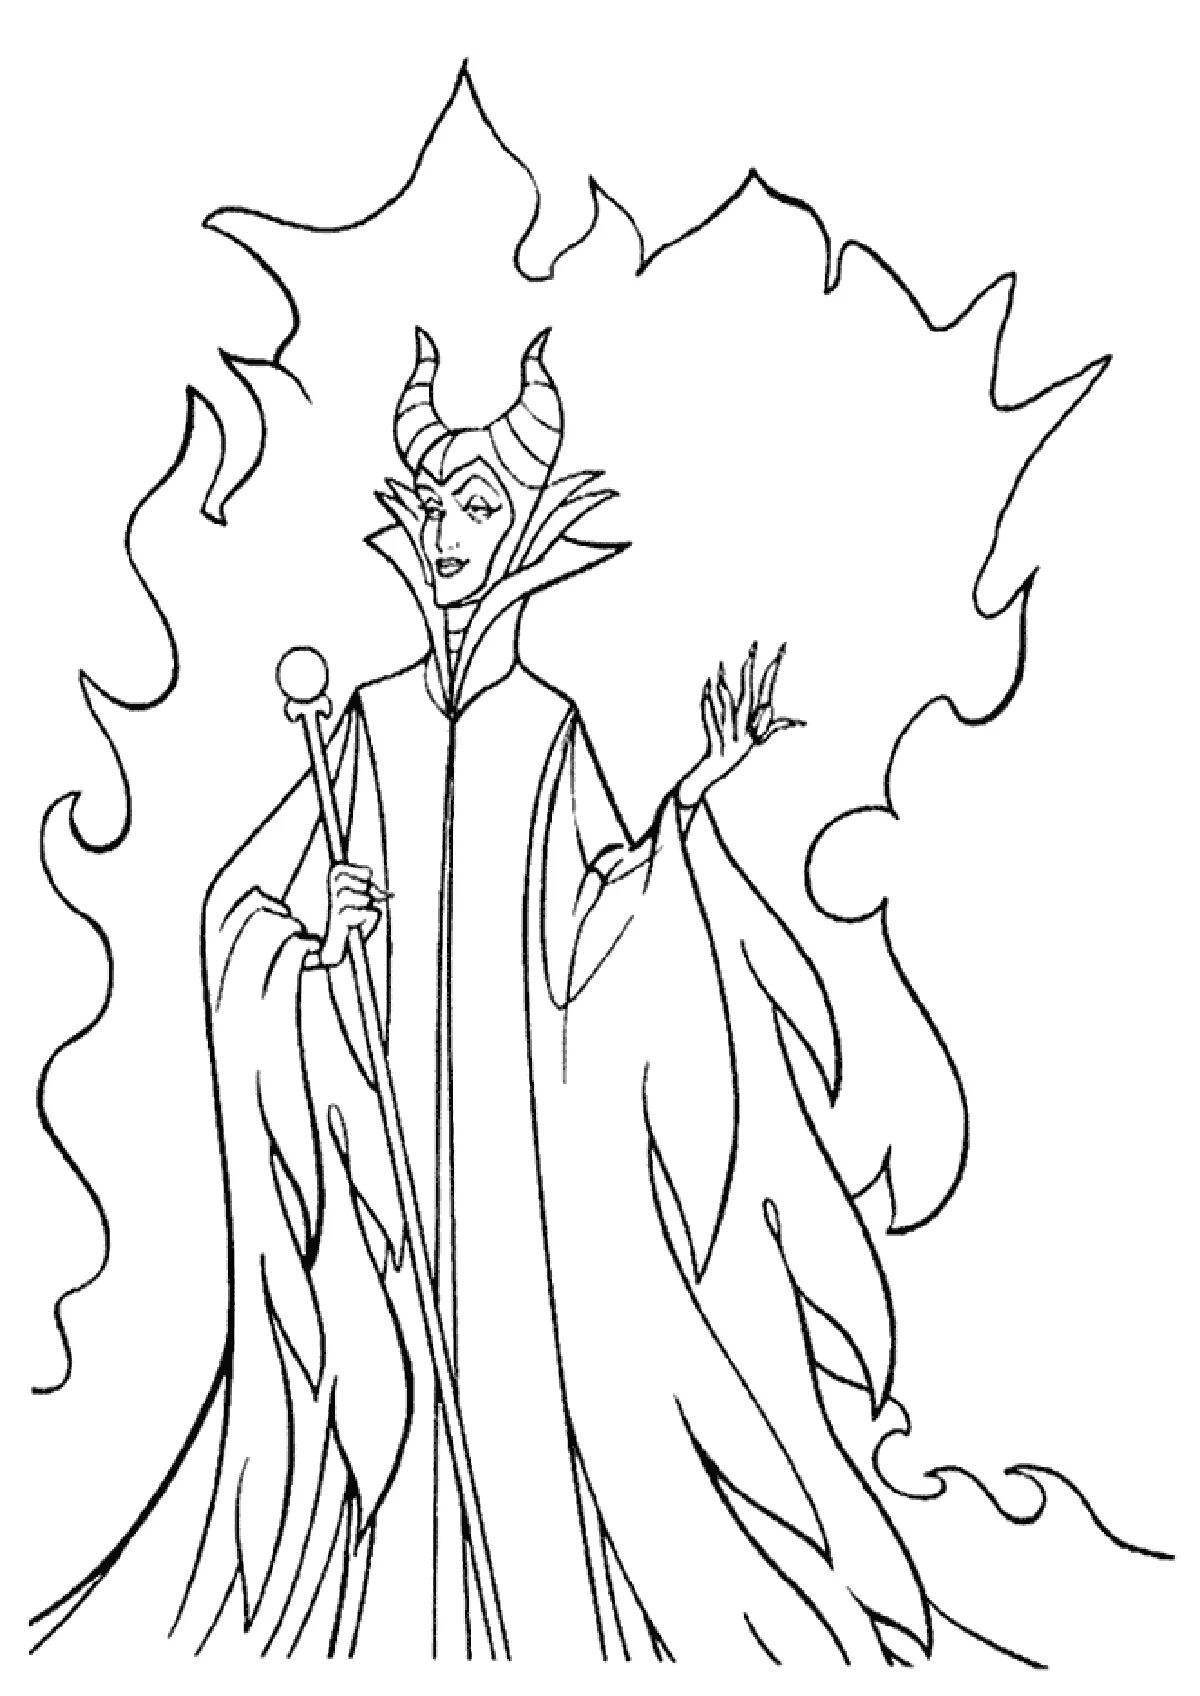 Fancy maleficent coloring for kids